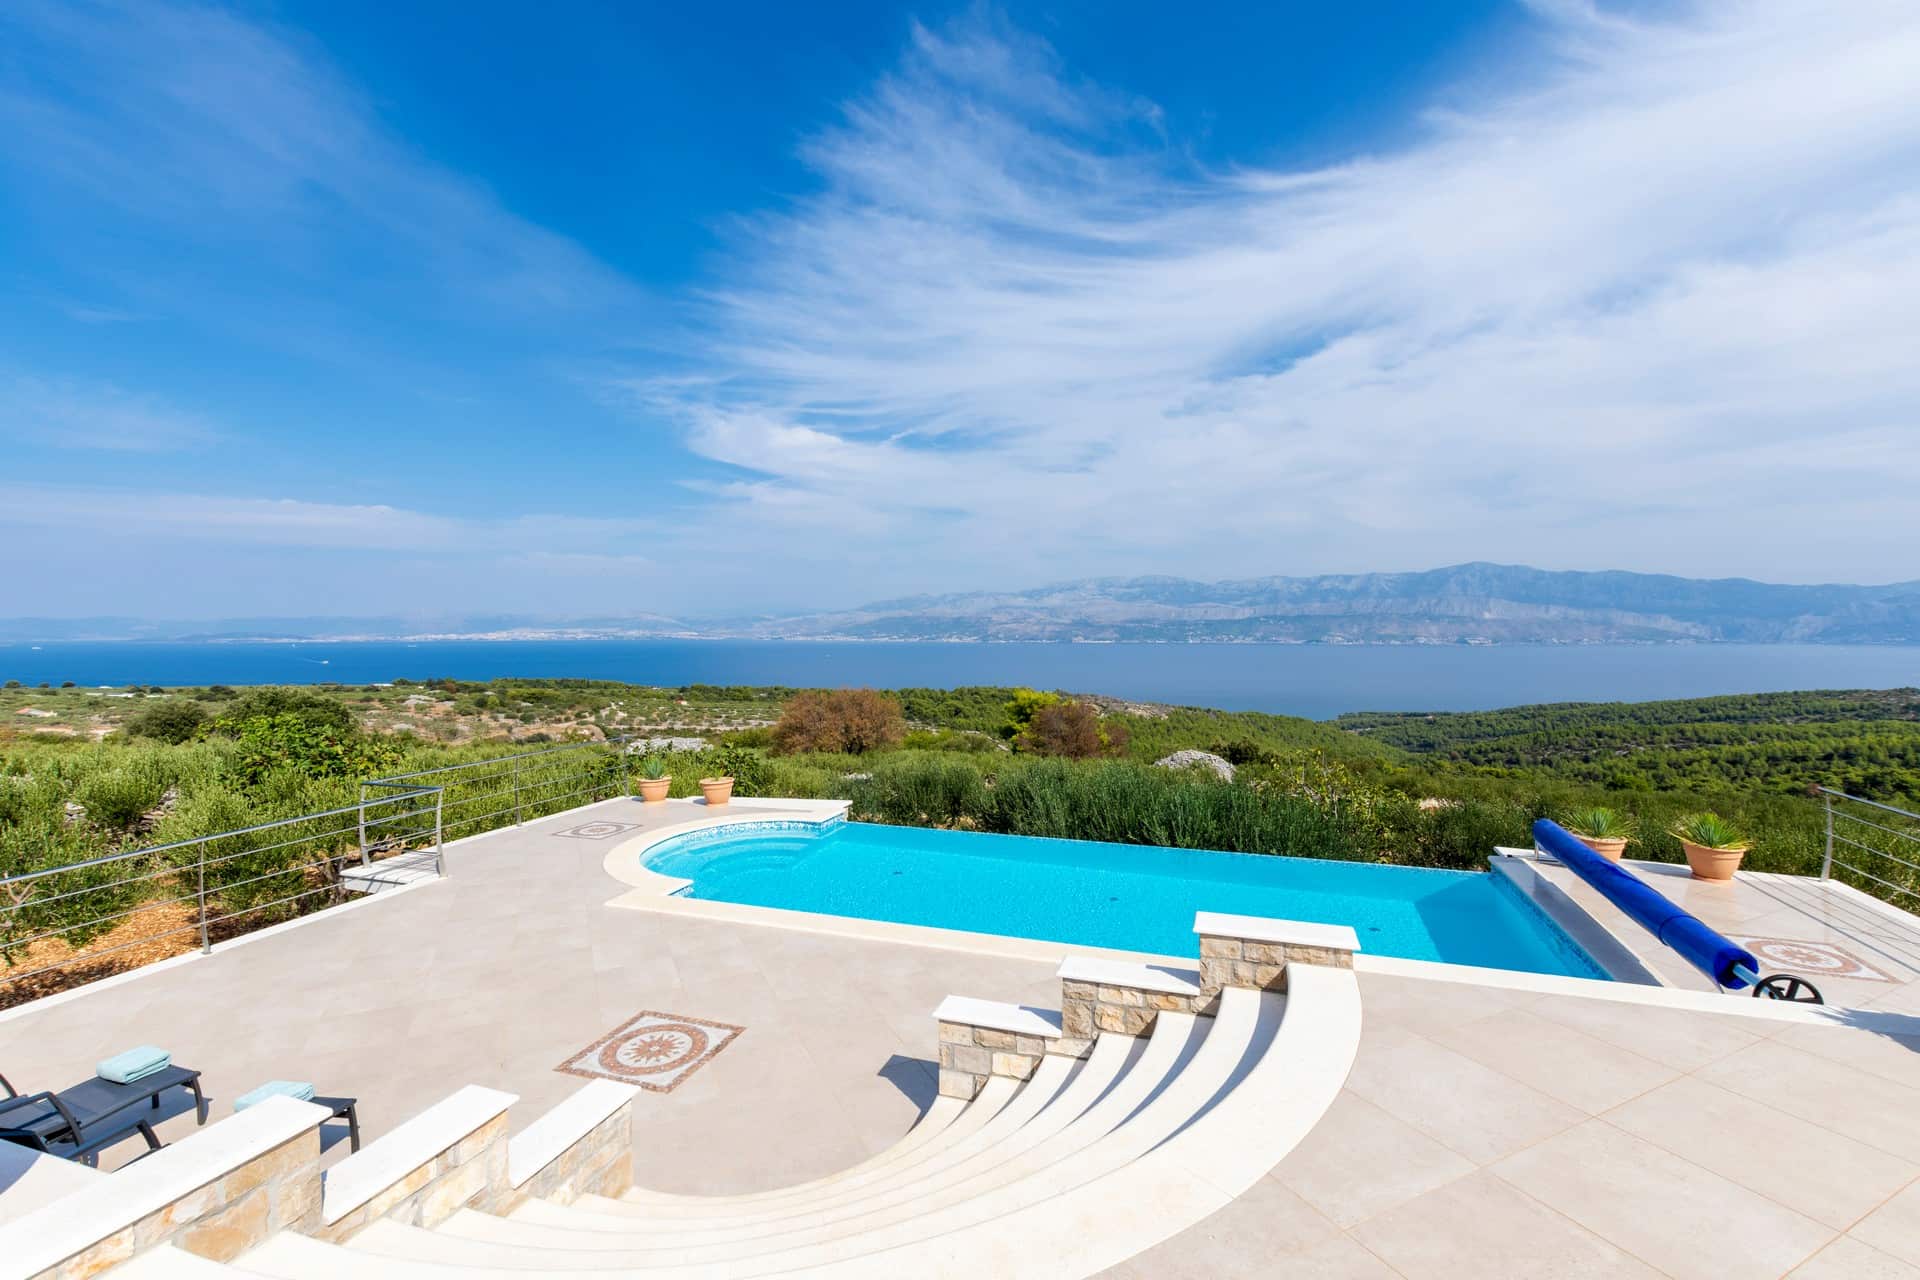 Villa with pool and a stunning sea view